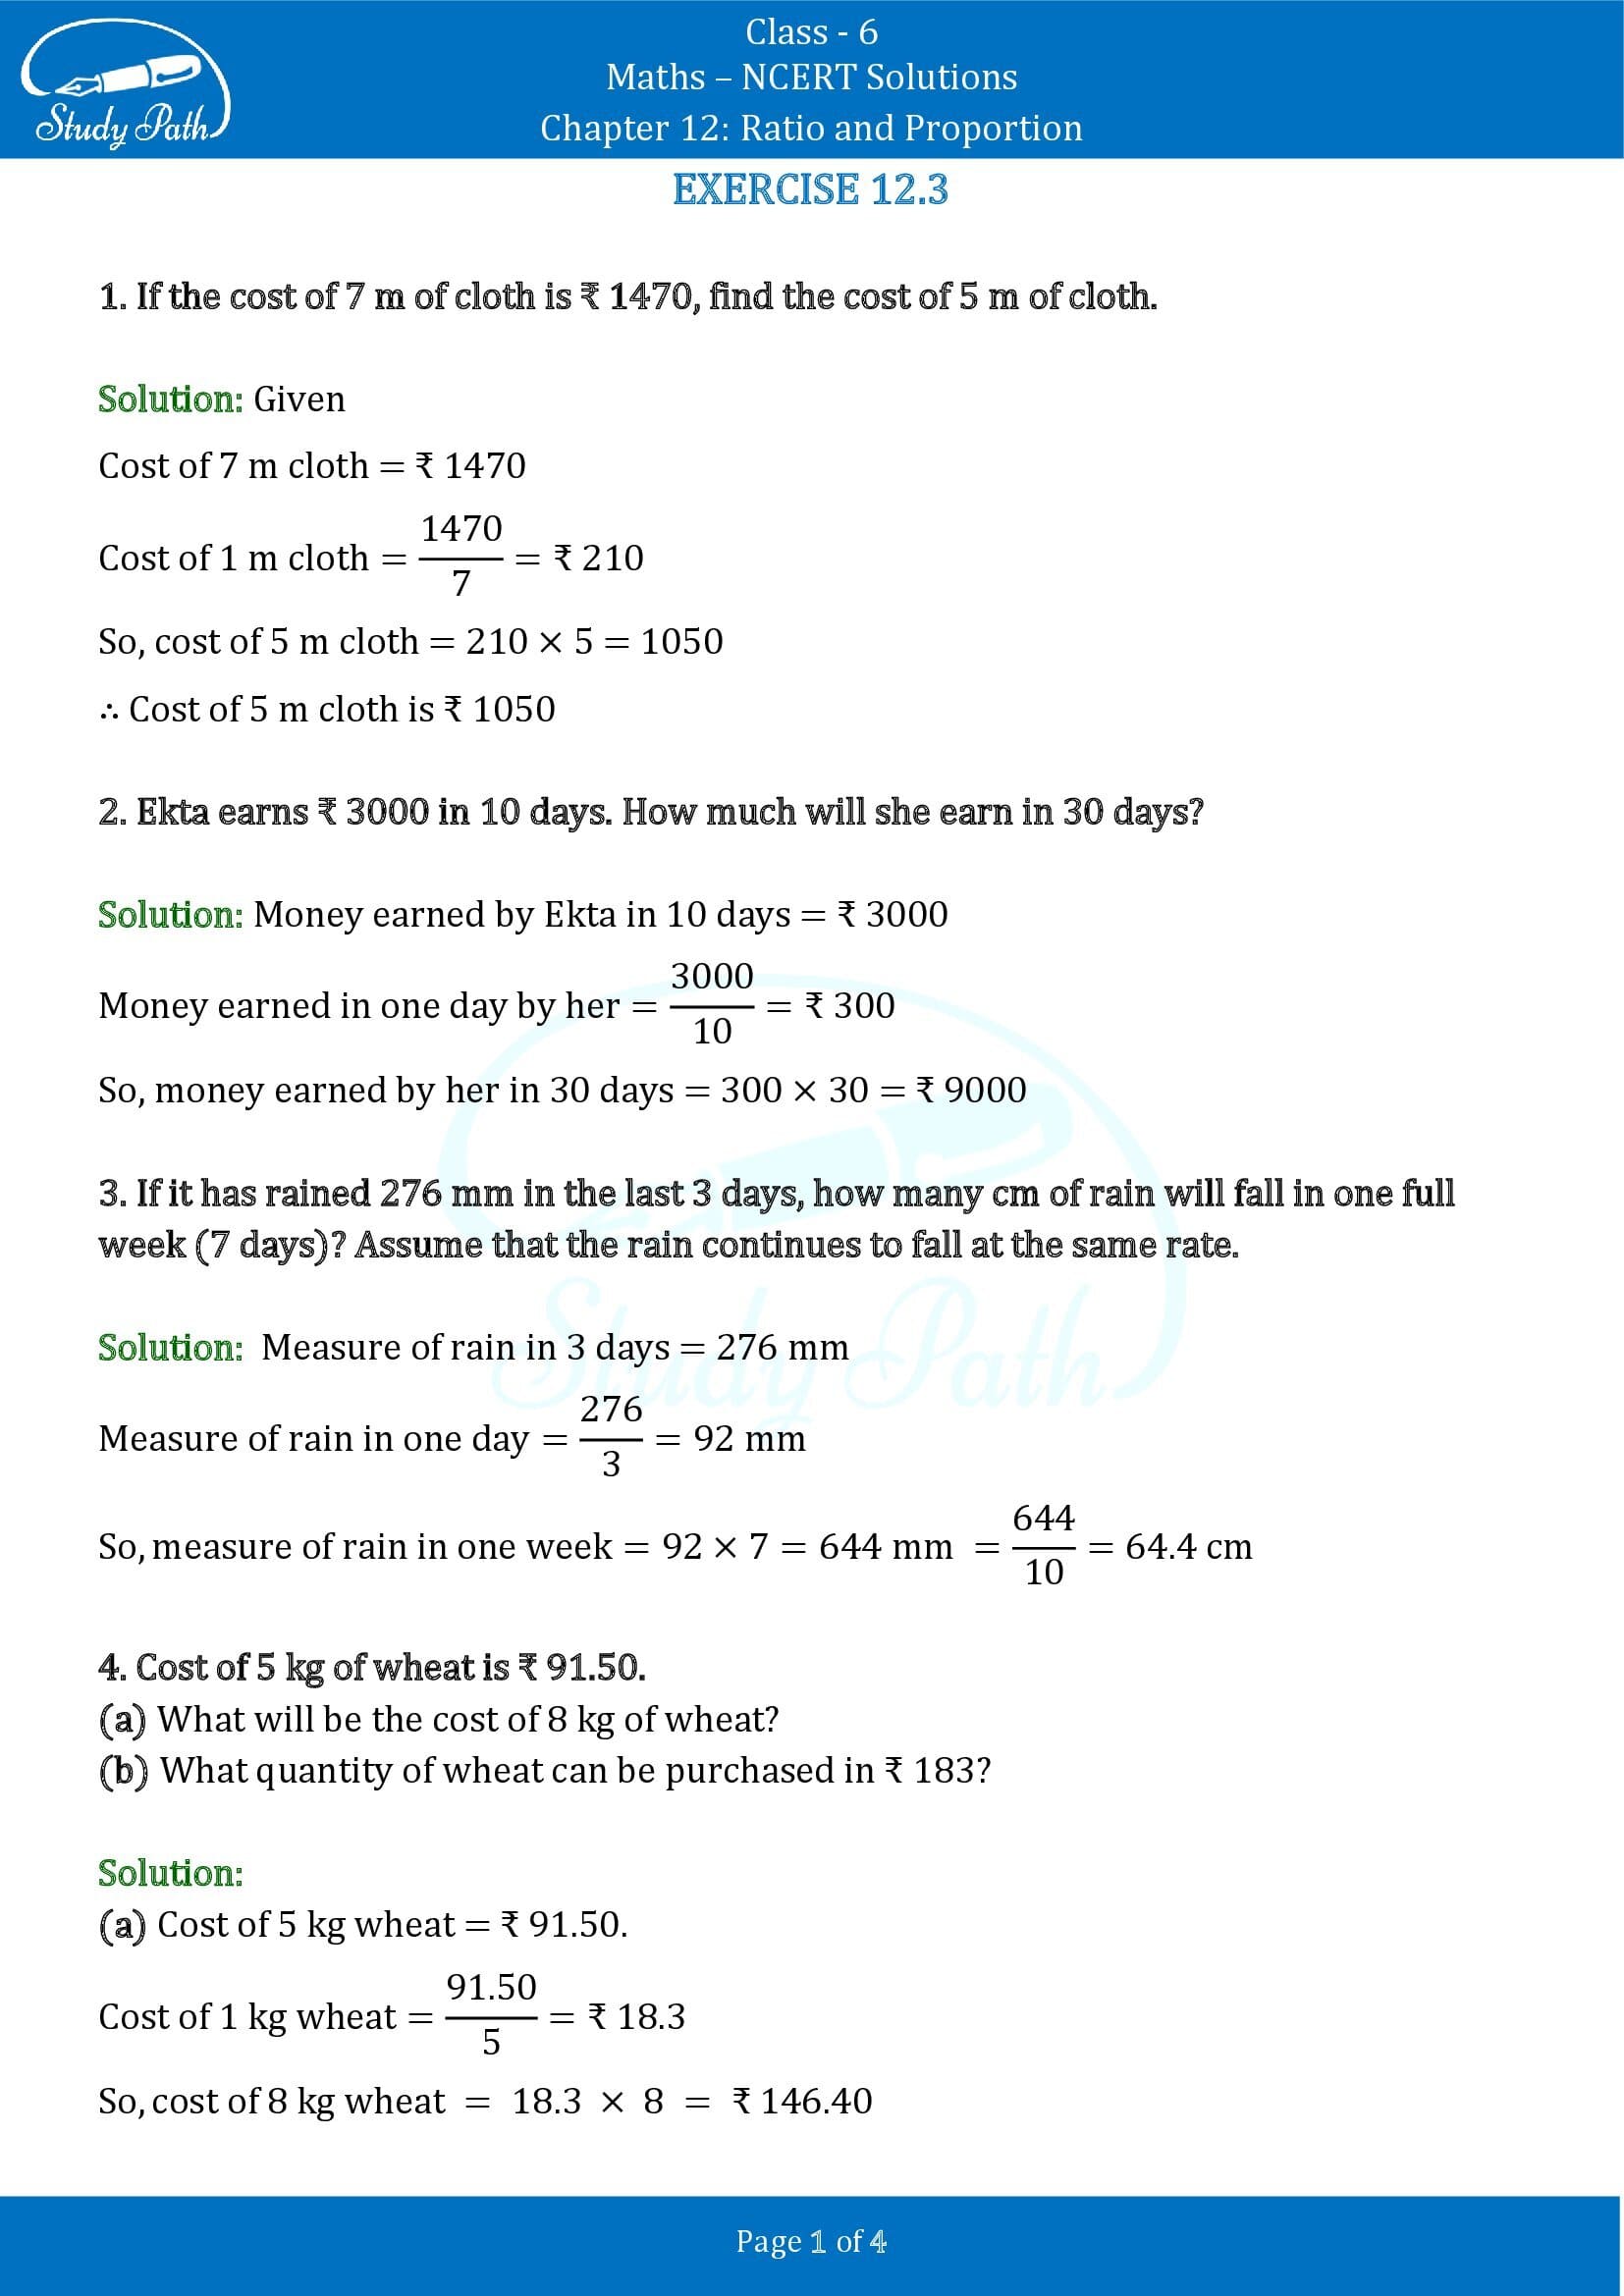 NCERT Solutions for Class 6 Maths Chapter 12 Ratio and Proportion Exercise 12.3 00001